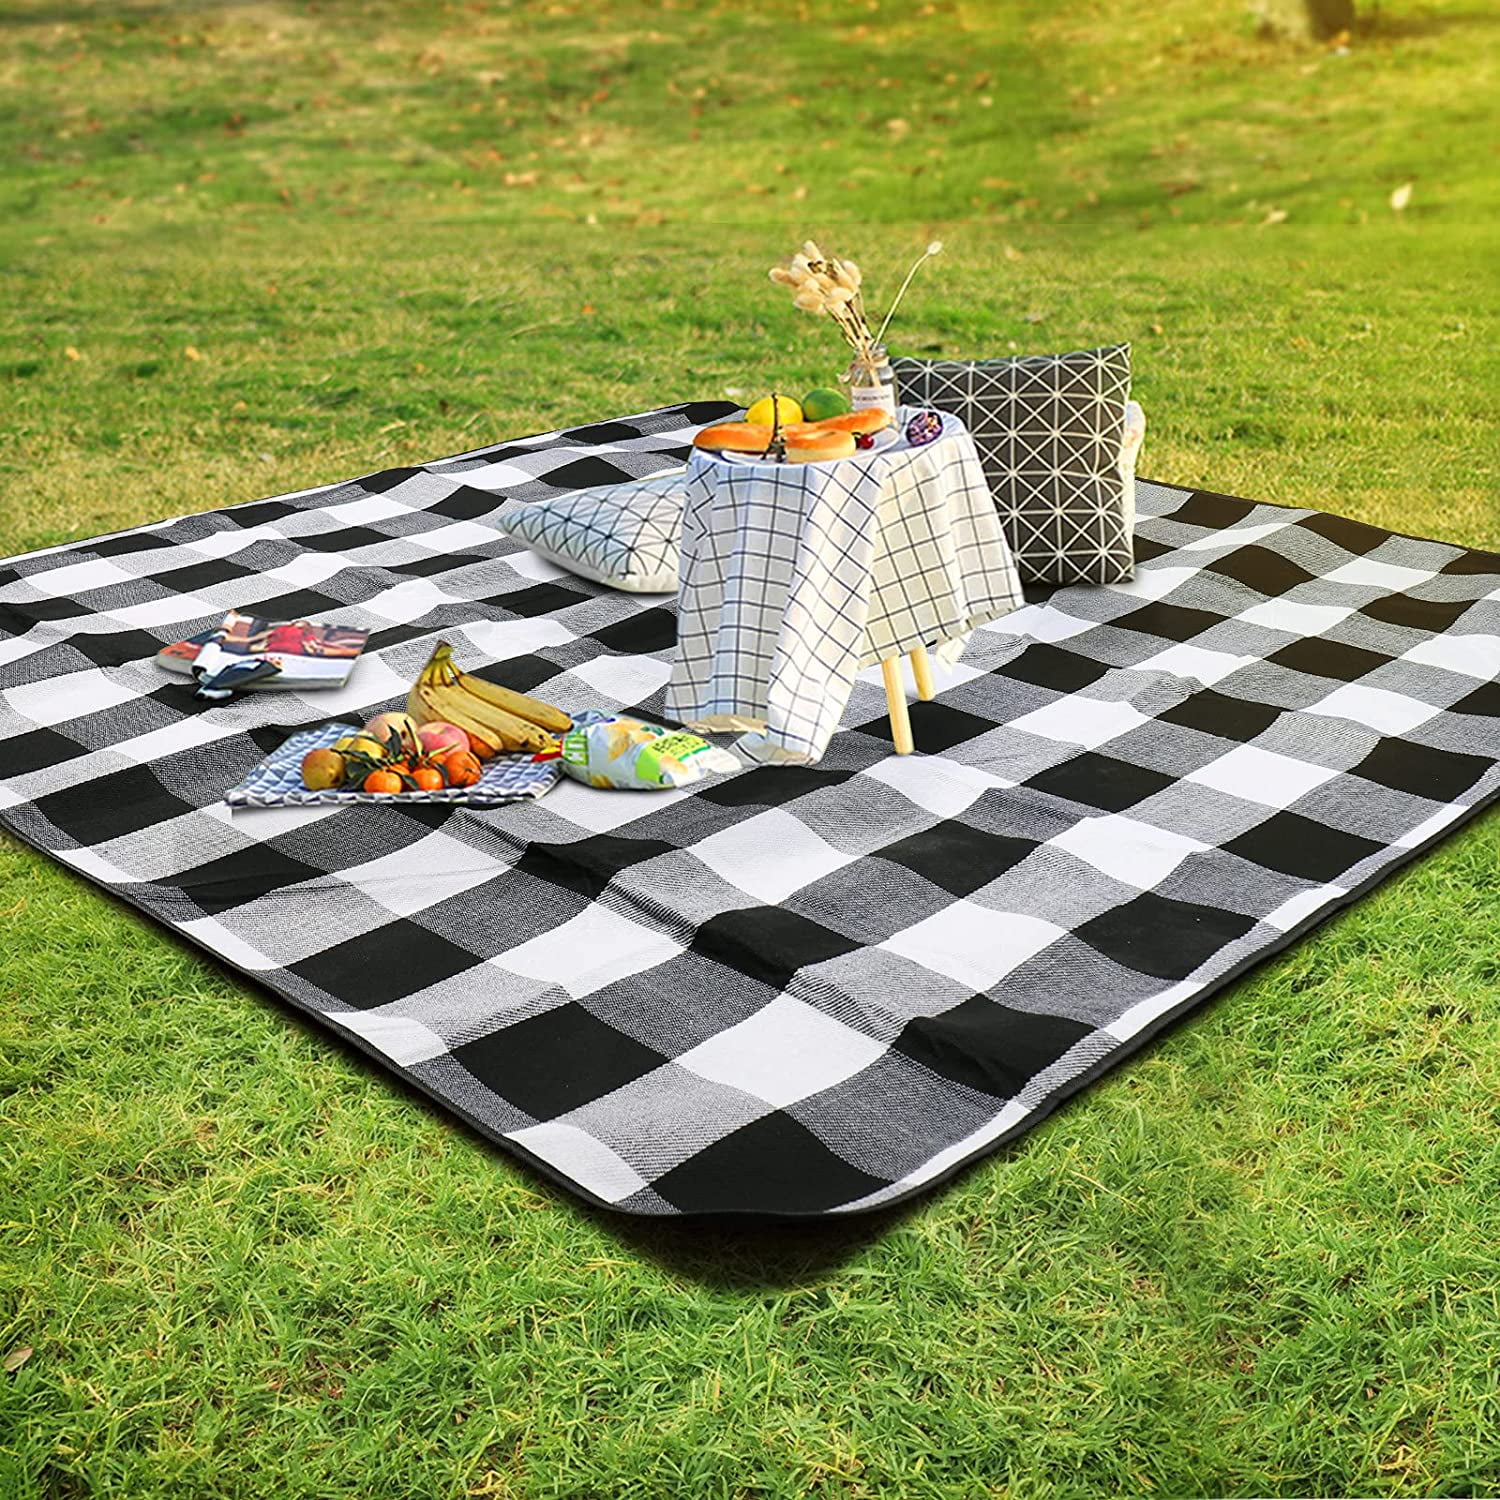 SKYSPER Picnic Blanket Large Outdoor Carpet Mat Waterproof Foldable Camping Tote Light Compact Oversized Rug 